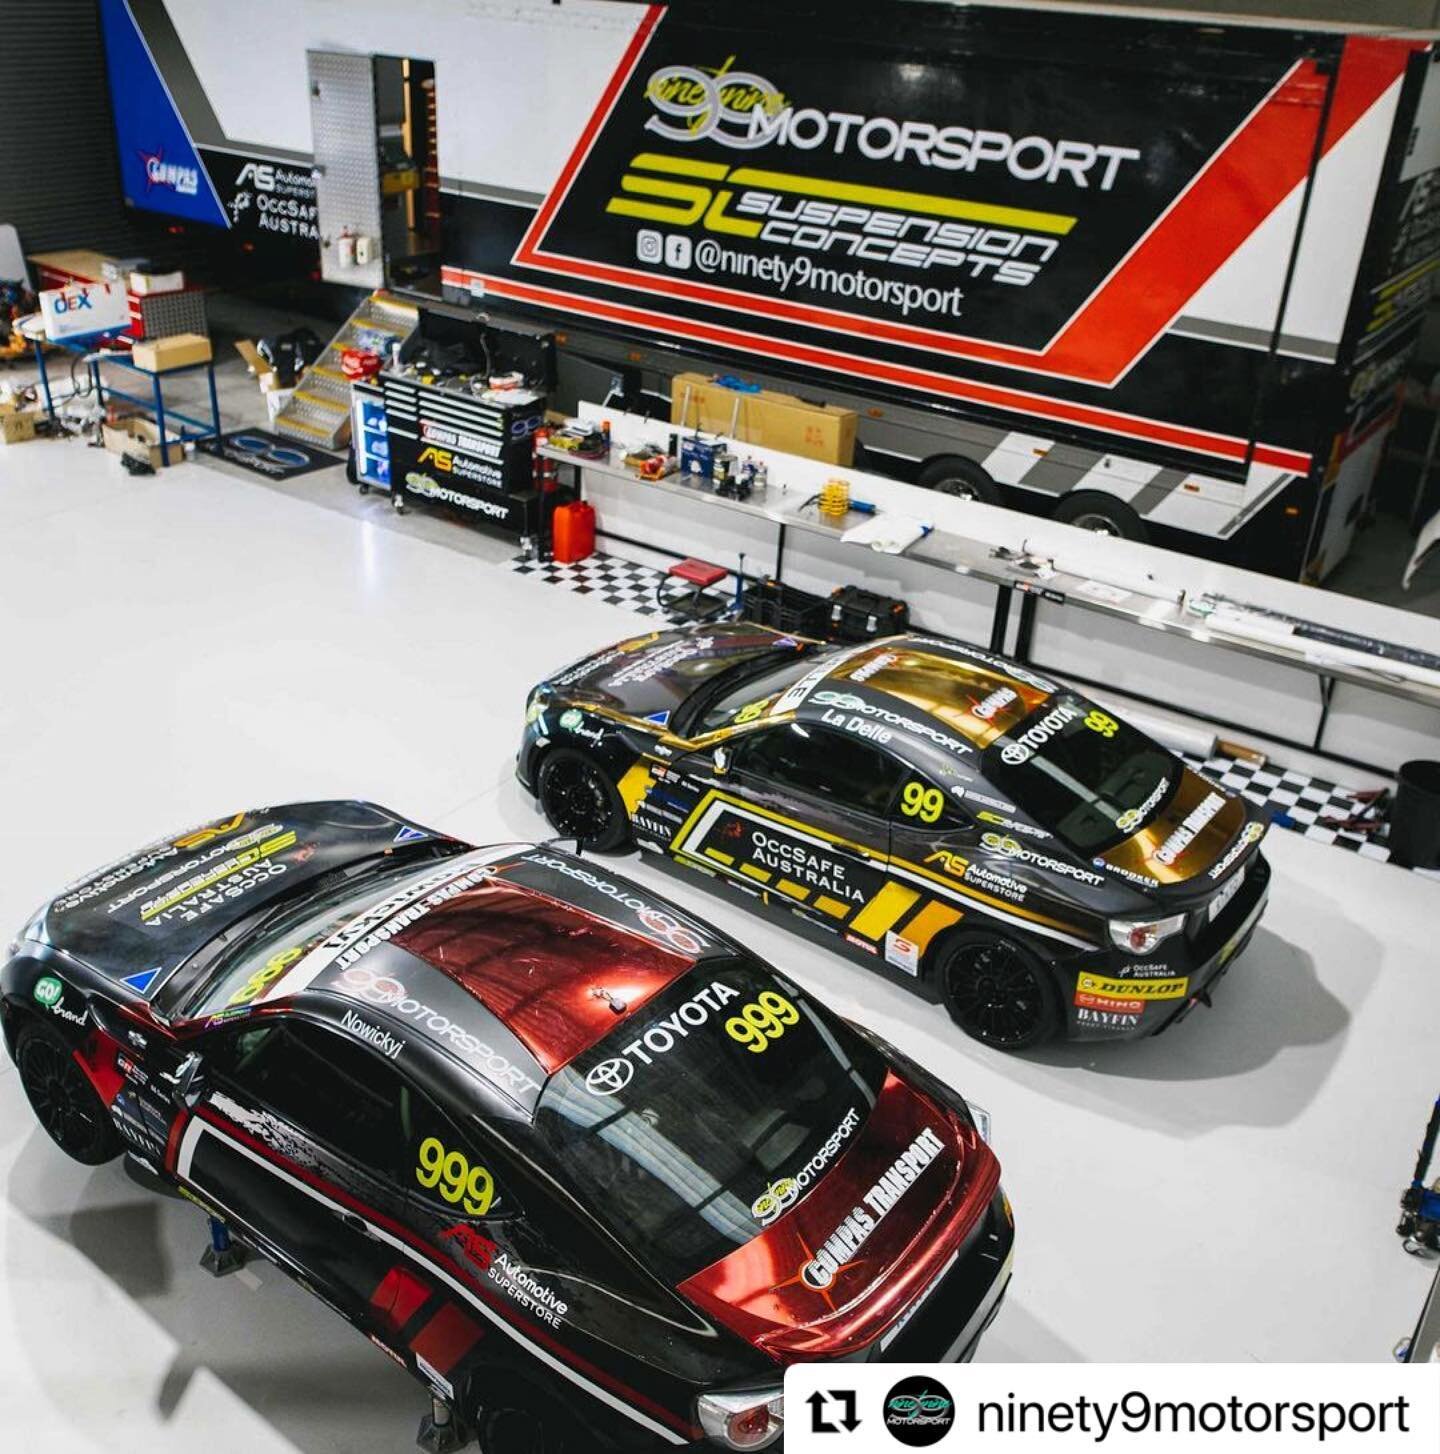 #Repost @ninety9motorsport with @use.repost
・・・
▀▄▀▄▀▄ Proud ▄▀▄▀
Religion says Pride is &ldquo;sin it&rsquo;s final form&rdquo;. Sign me up, it&rsquo;s been a long few years, but I&rsquo;m so proud to say that I&rsquo;ve built the plan I set out in 